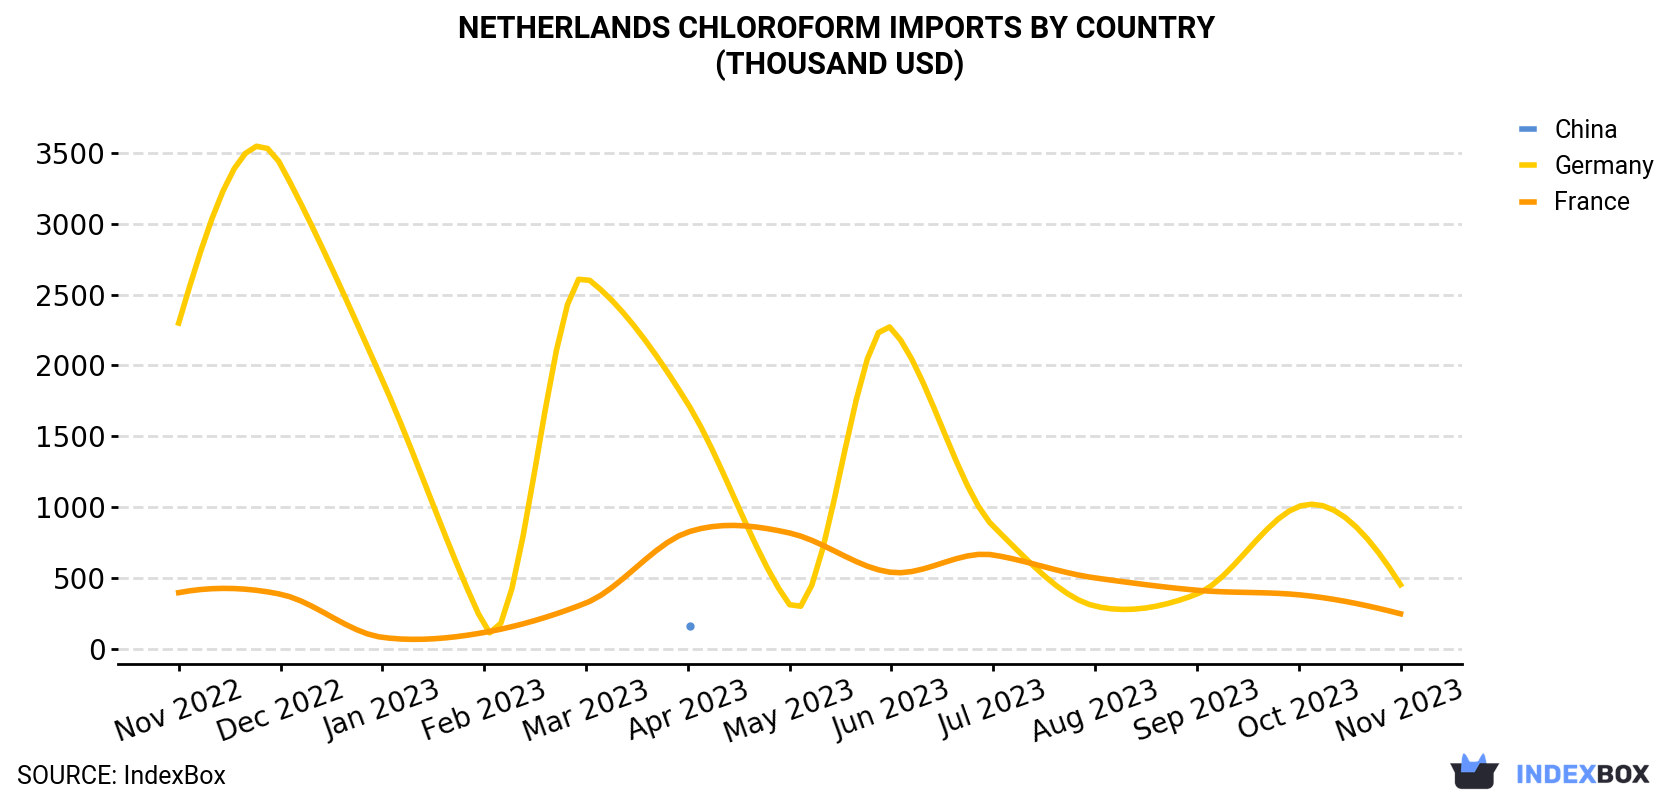 Netherlands Chloroform Imports By Country (Thousand USD)